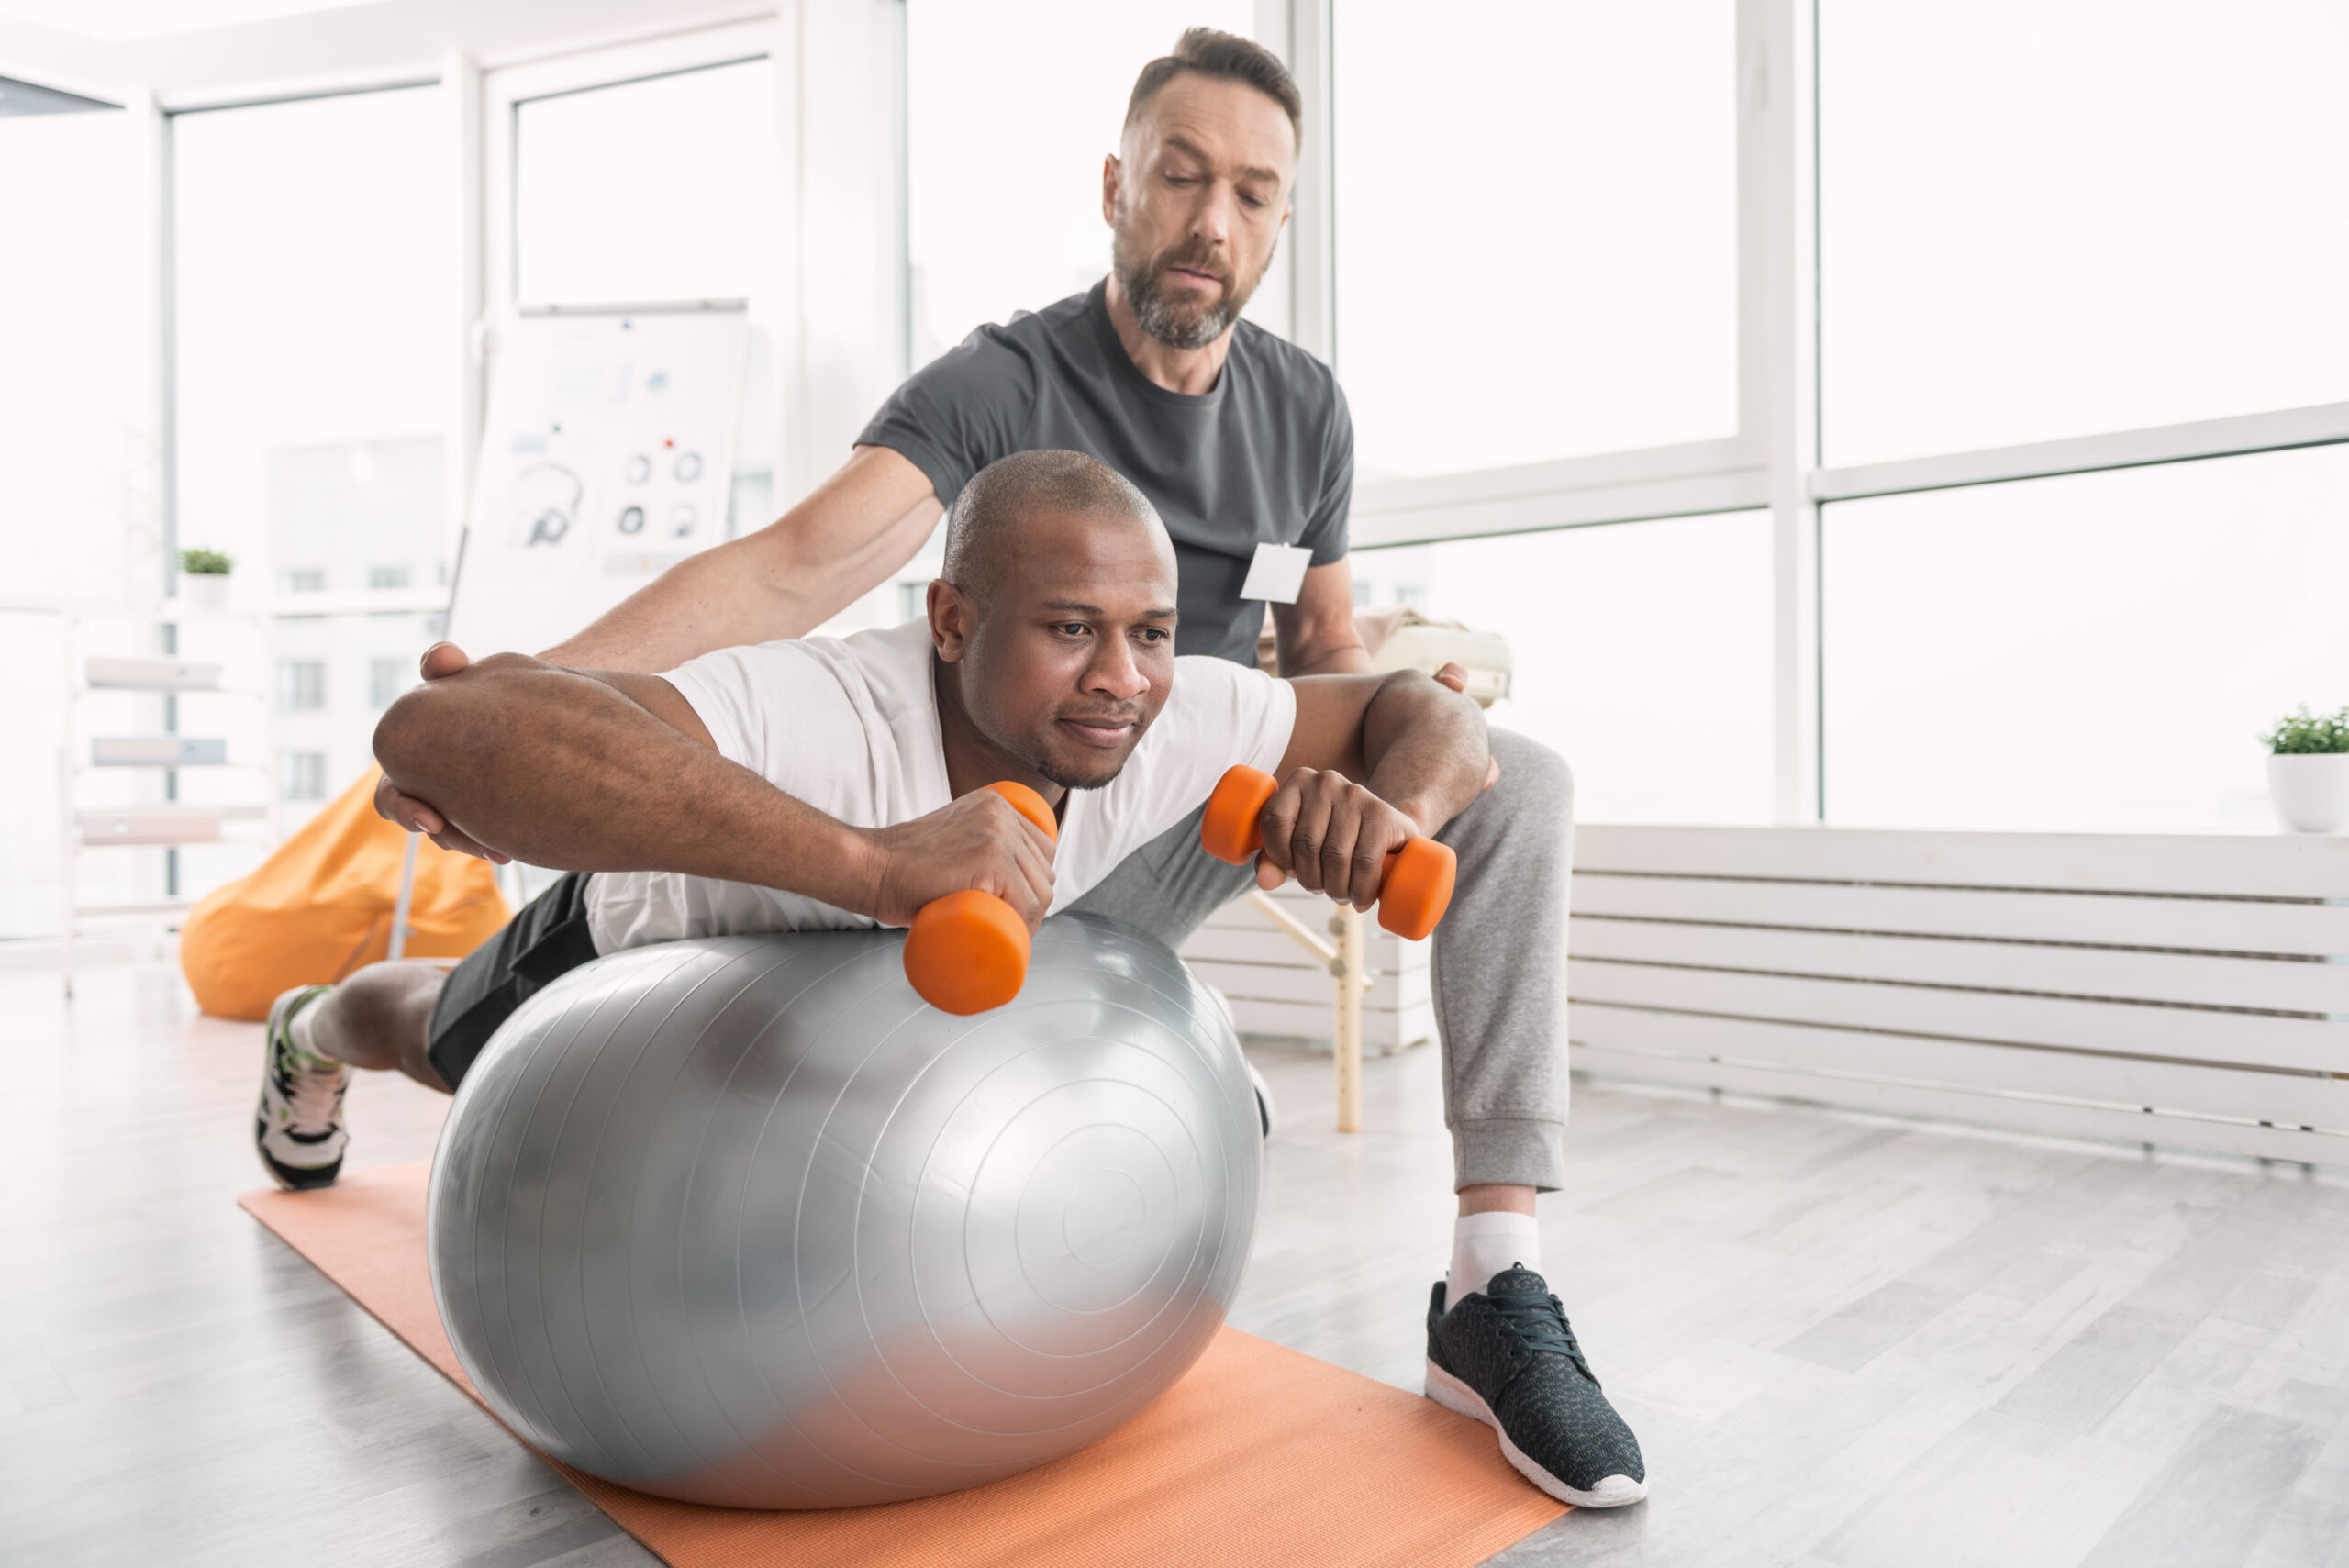 two men are doing exercises on exercise balls